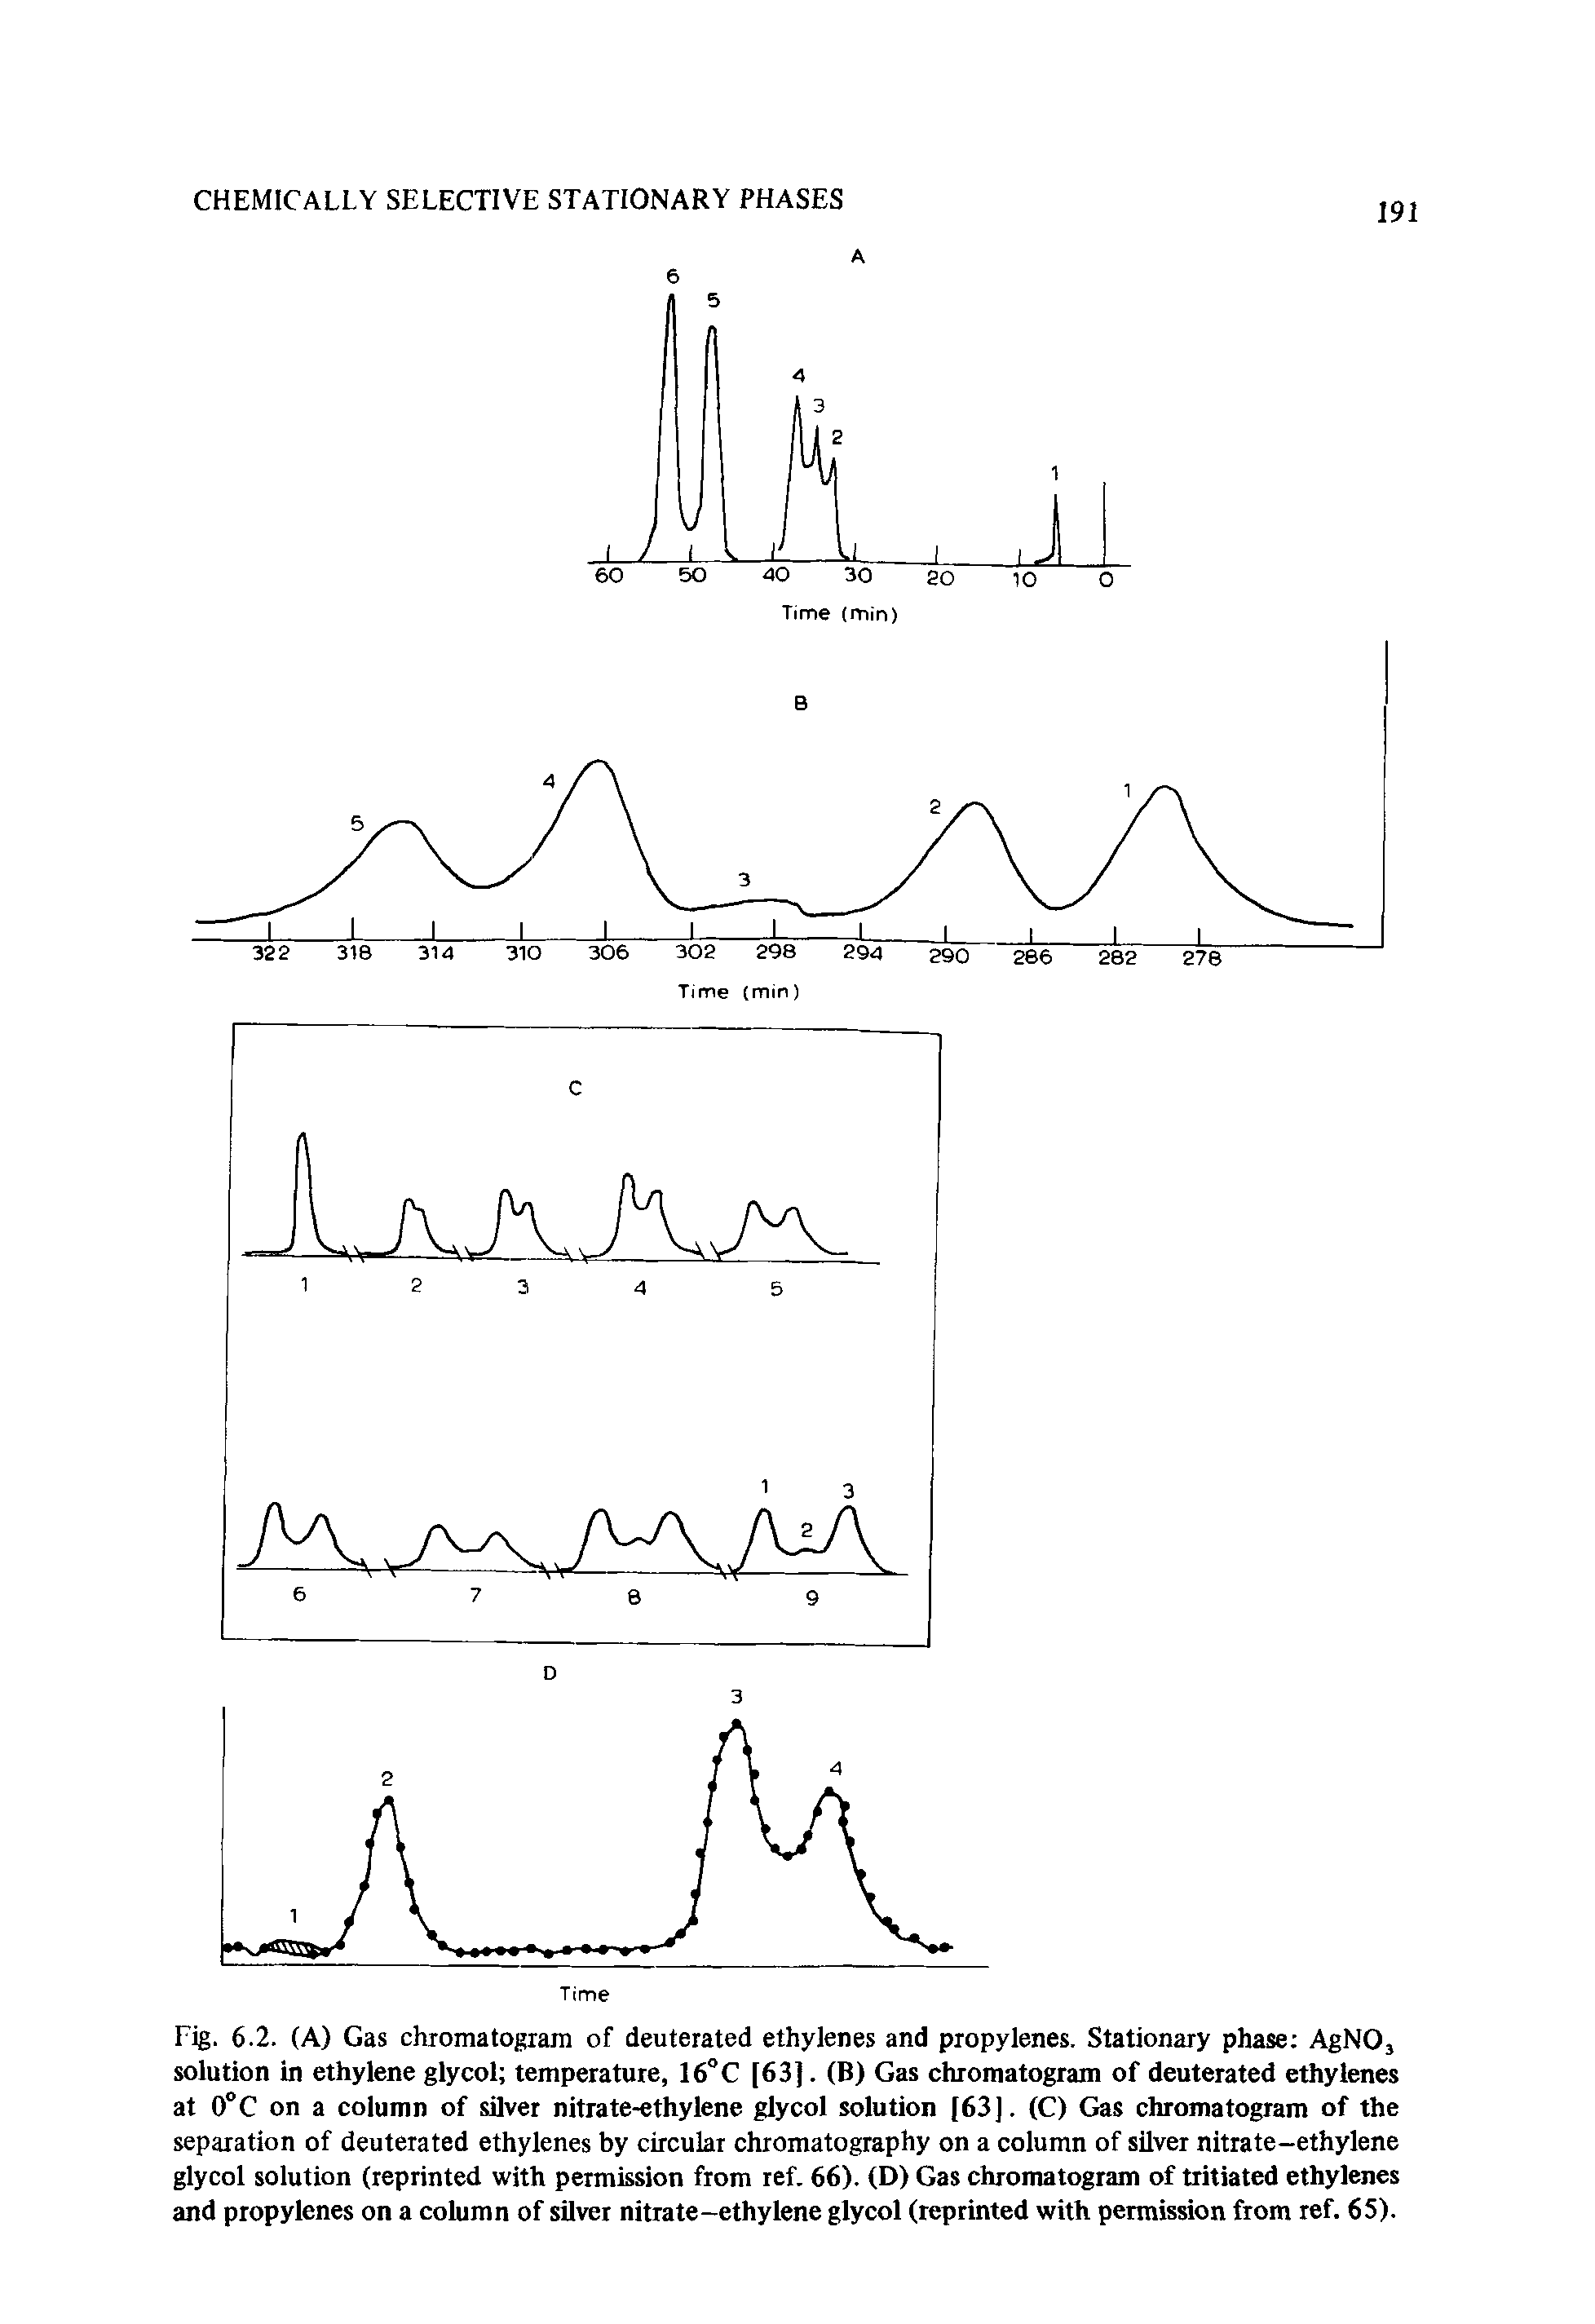 Fig. 6.2. (A) Gas chromatogram of deuterated ethylenes and propylenes. Stationary phase AgNO, solution in ethylene glycol temperature, 16 C [63]. (B) Gas chromatogram of deuterated ethylenes at 0°C on a column of silver nitrate-ethylene glycol solution [63]. (C) Gas chromatogram of the separation of deuterated ethylenes by circular chromatography on a column of silver nitrate-ethylene glycol solution (reprinted with permission from ref. 66). (D) Gas chromatogram of tritiated ethylenes and propylenes on a column of silver nitrate-ethylene glycol (reprinted with permission from ref. 65).